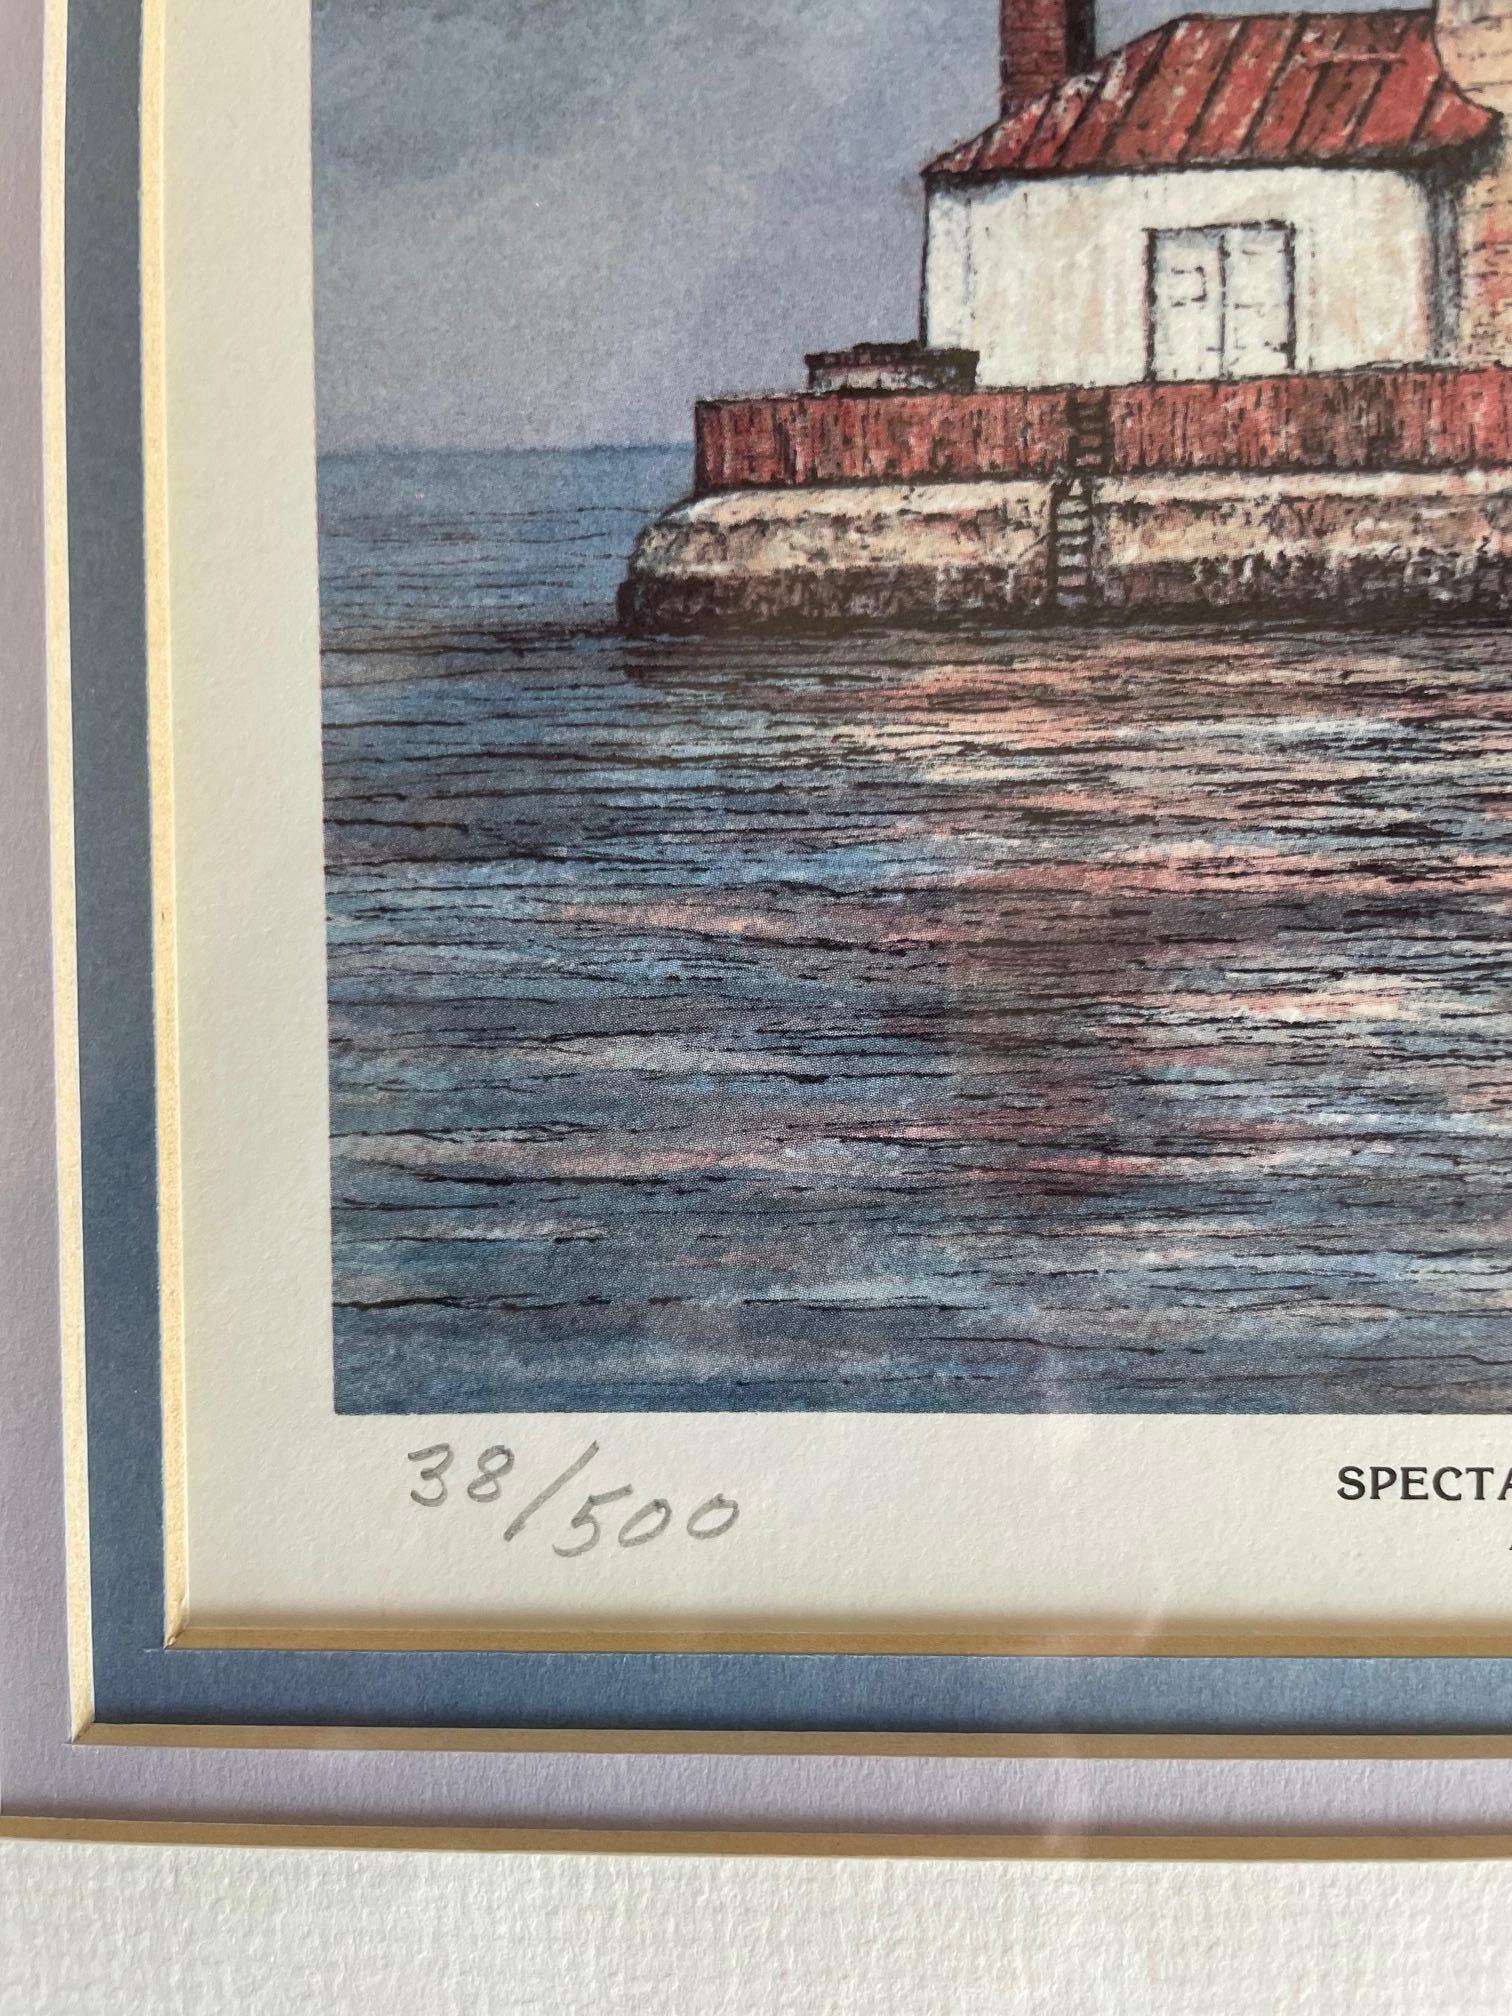 Spectacle Reef Light/ Lake Huron - Realist Print by Unknown